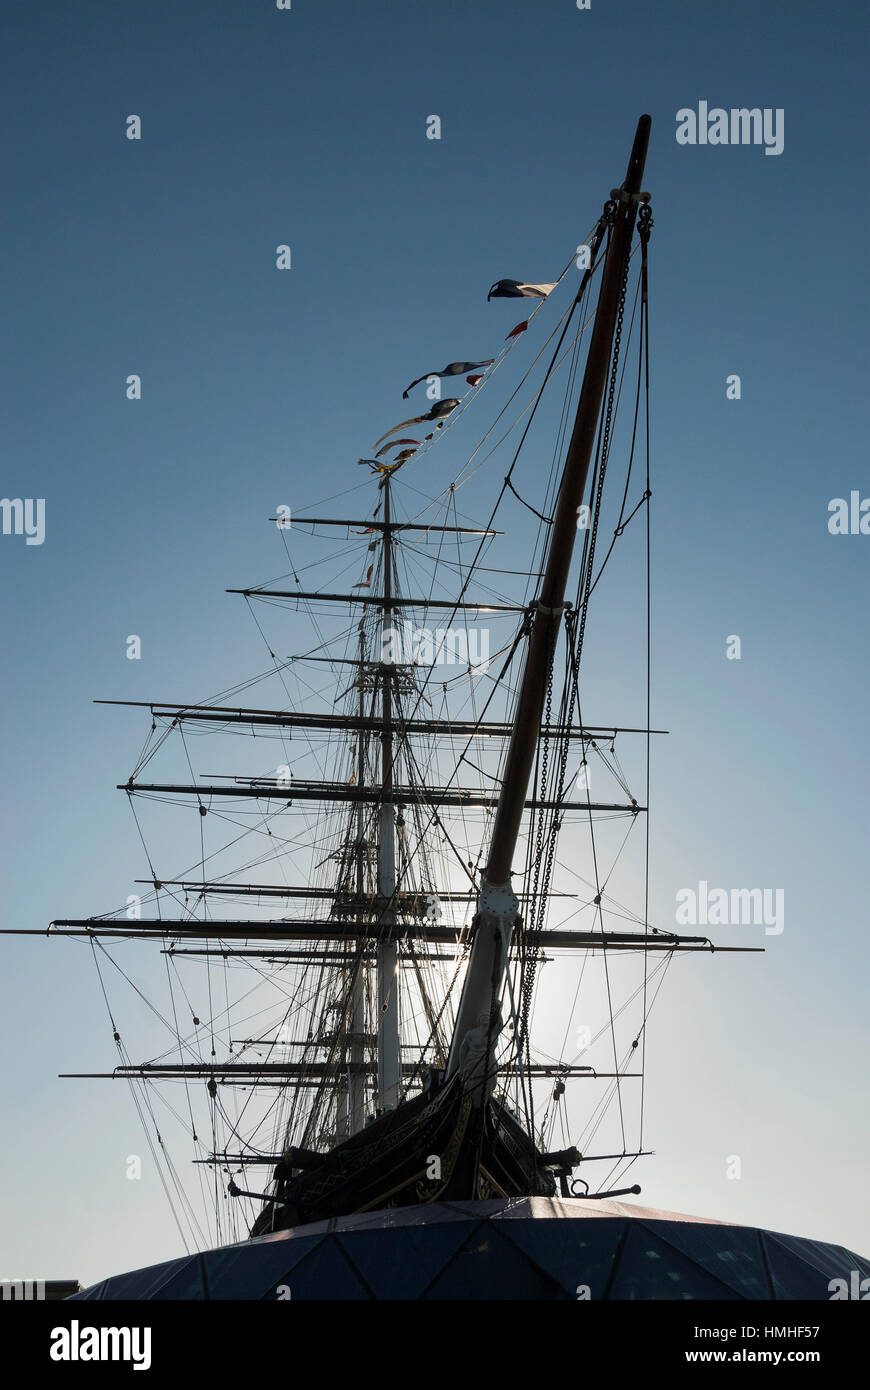 The Cutty Sark tea cipper ship in dry dock, Greenwich, London, Stock Photo